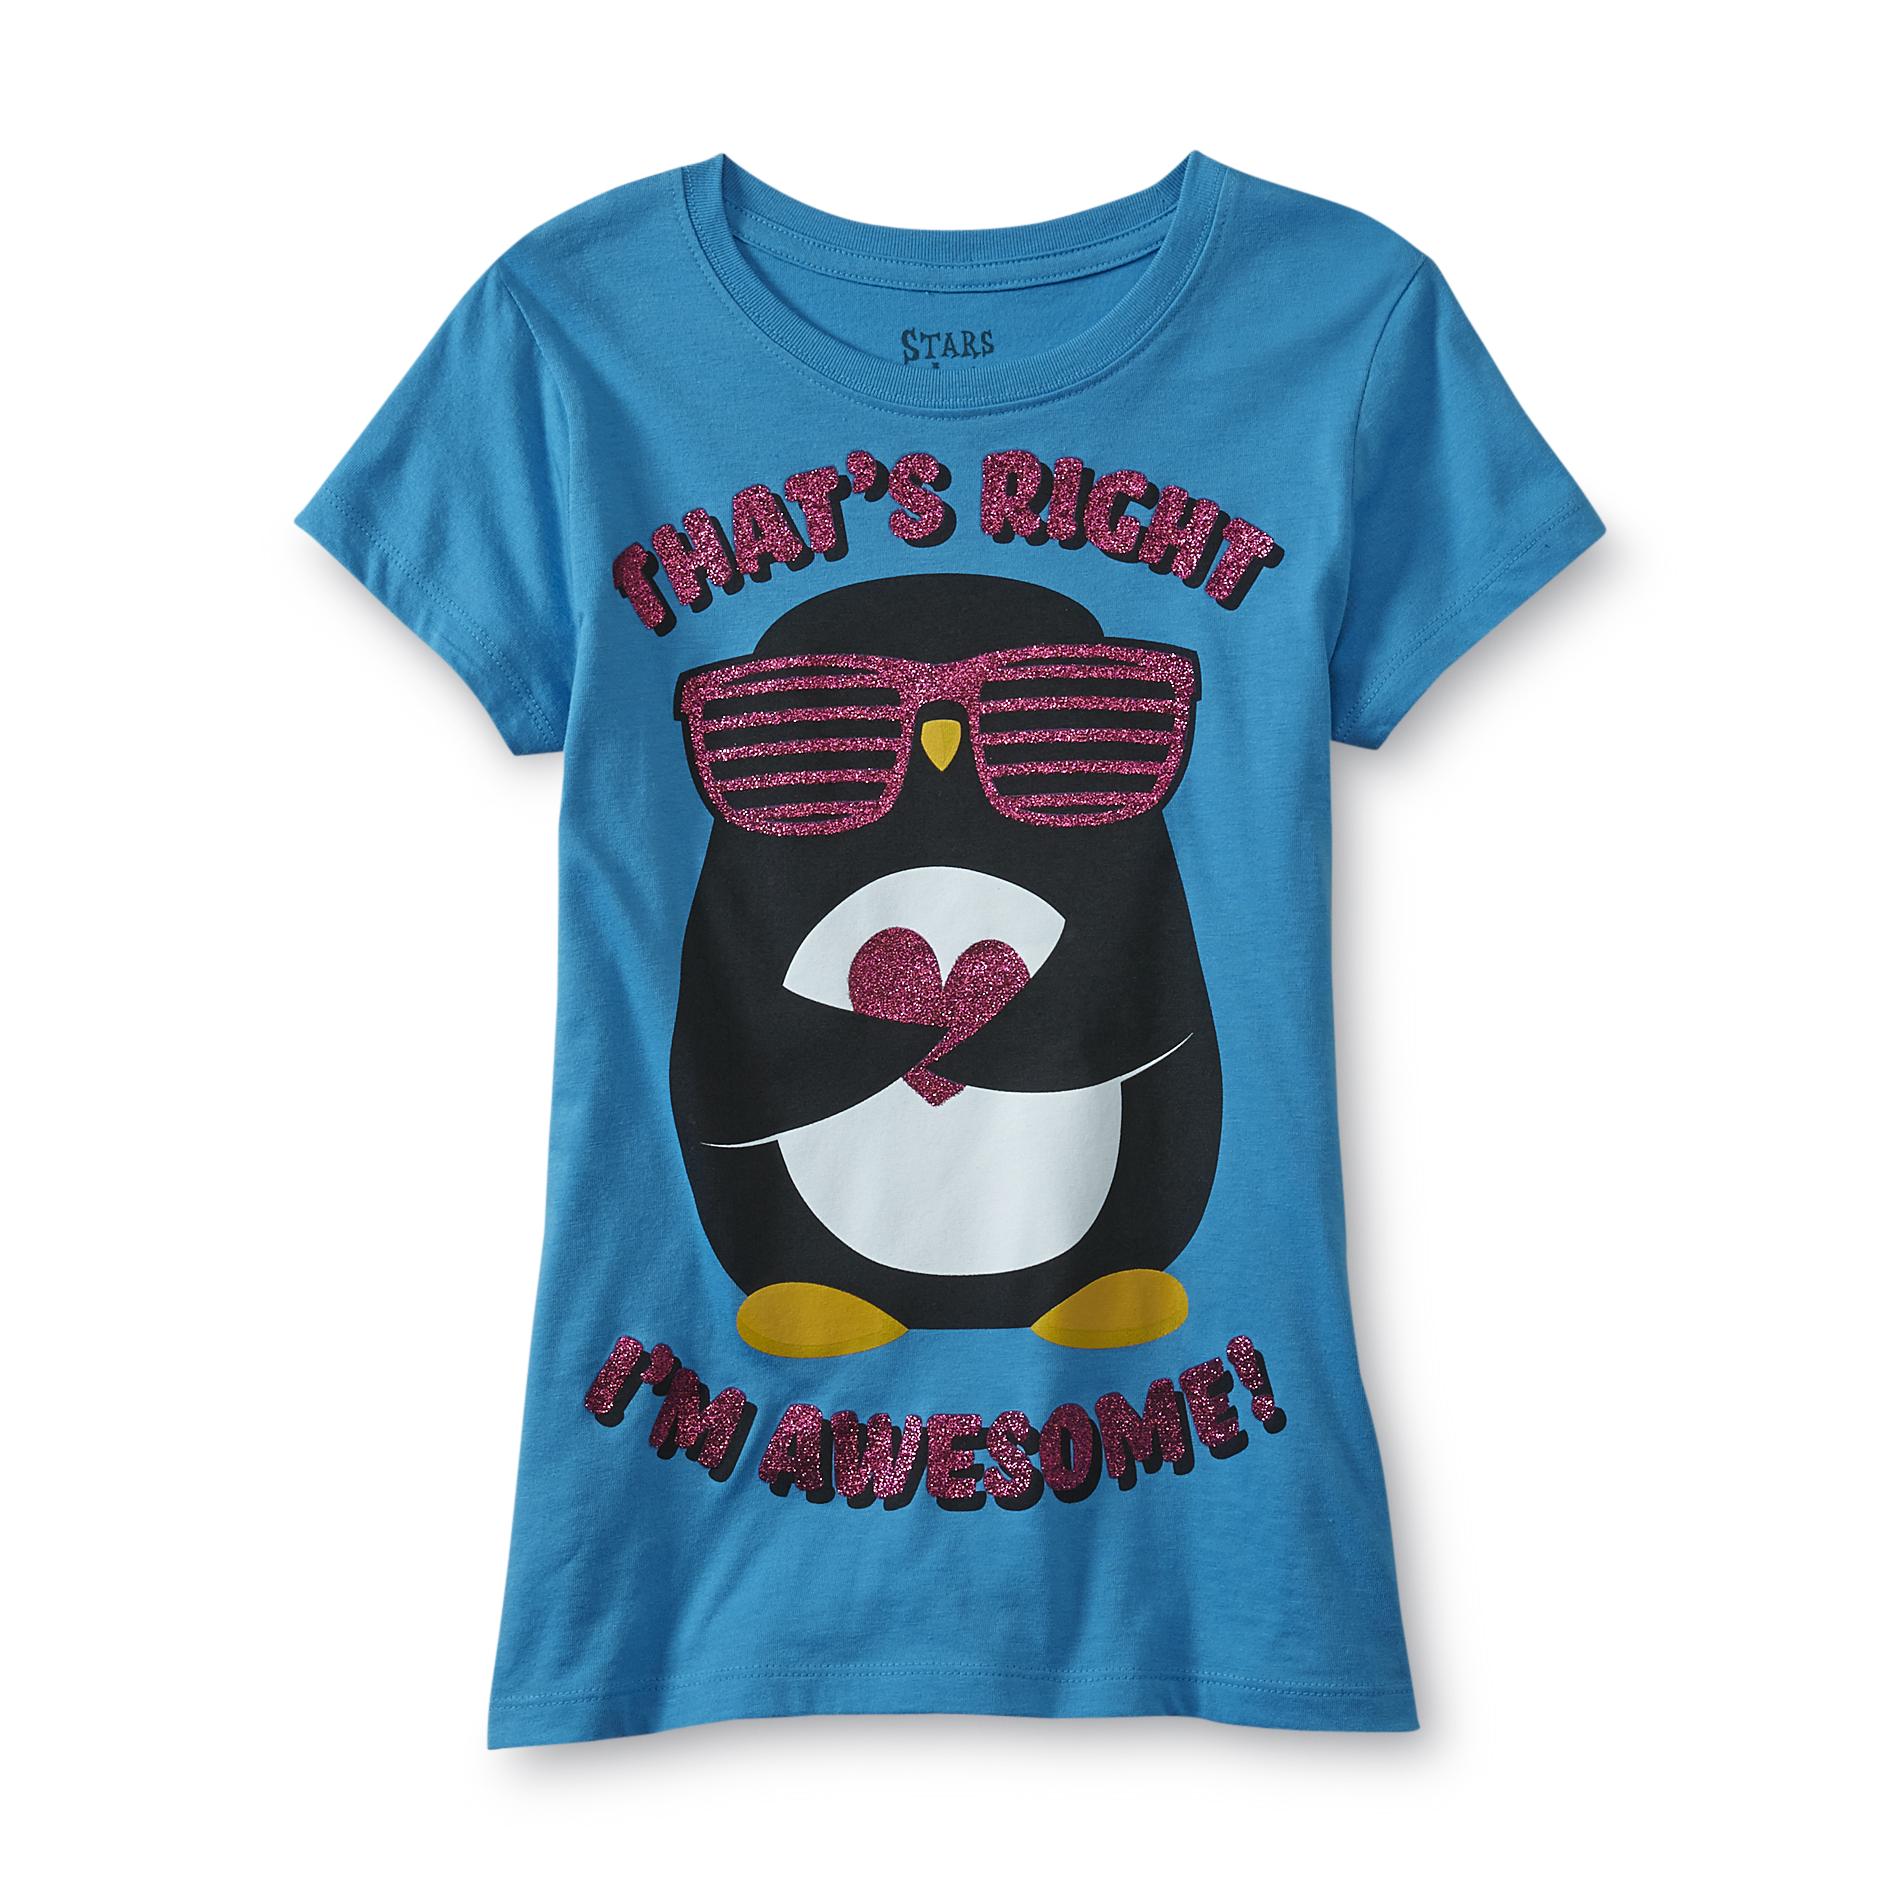 Hybrid Girl's Graphic T-Shirt - Awesome Penguin